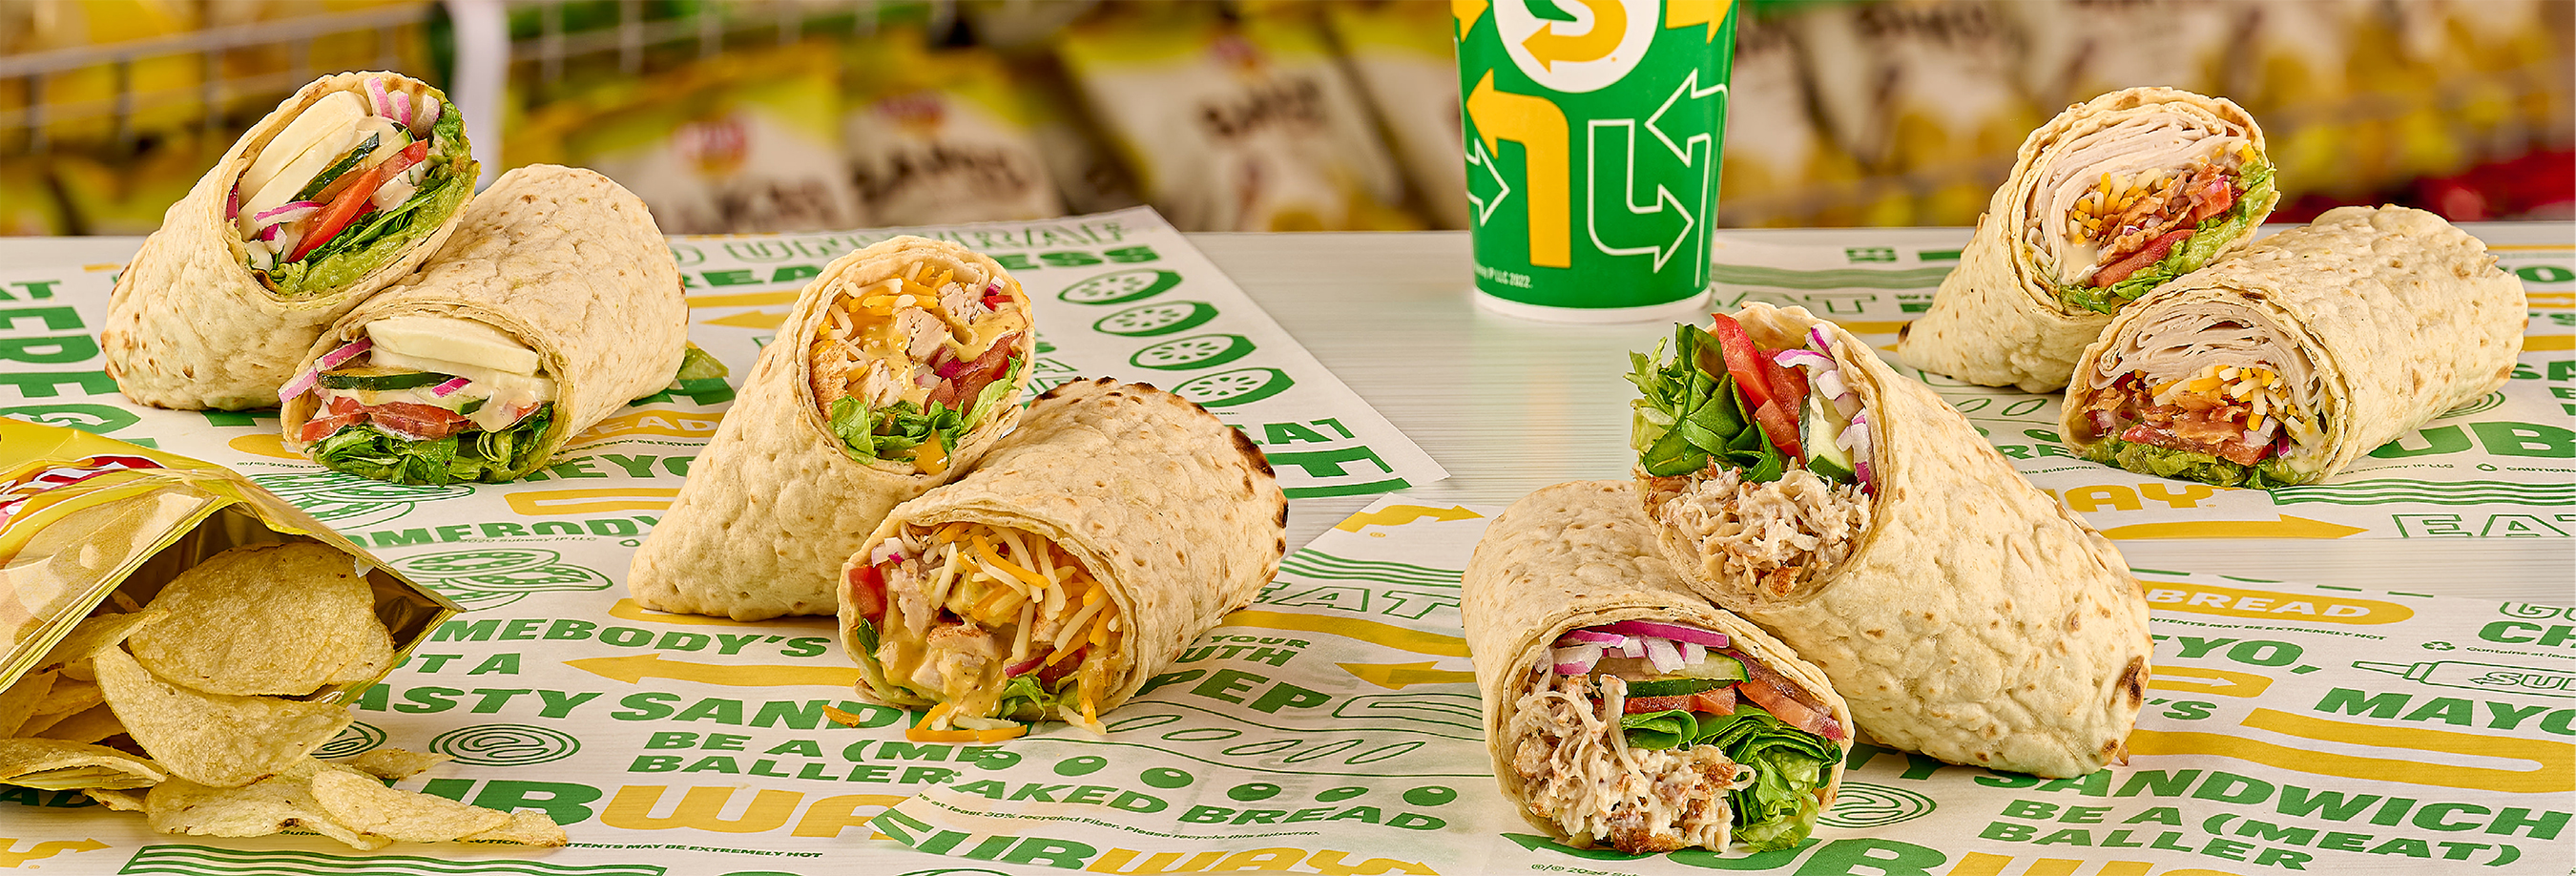 SUBWAY CONTINUES TO ELEVATE ITS MENU WITH MORE CRAVEABLE INGREDIENTS